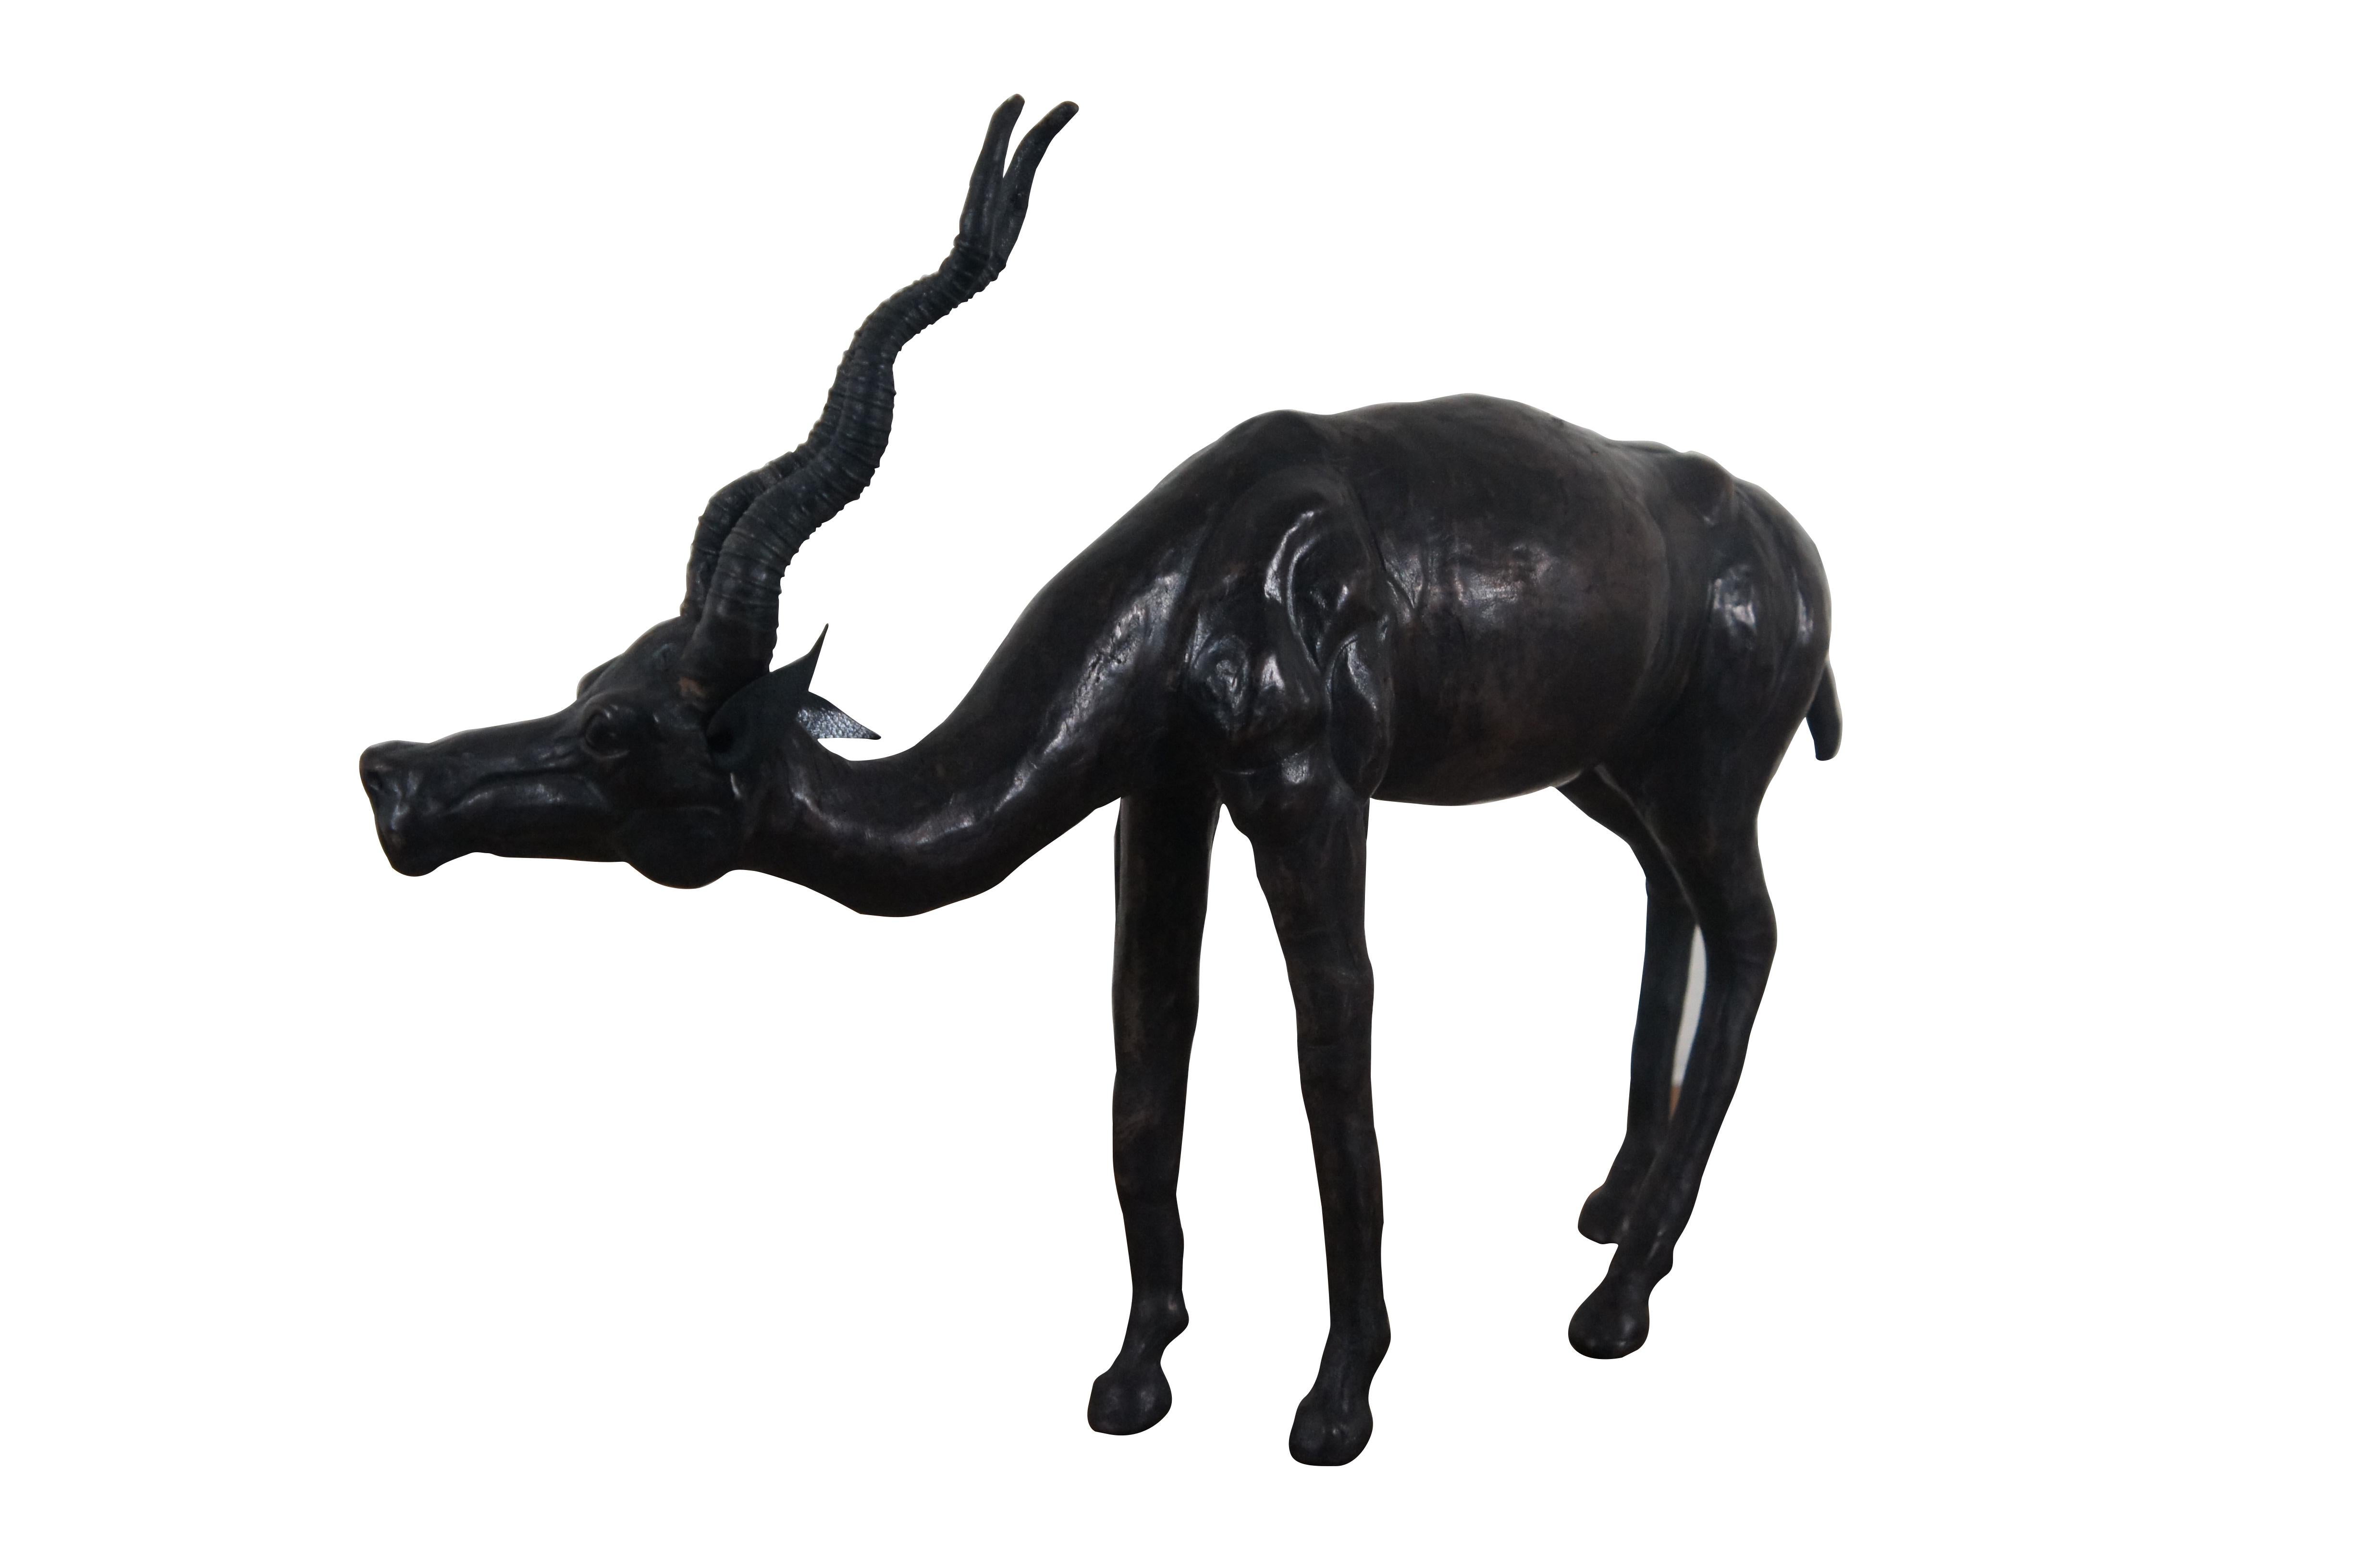 Exceptional mid 20th Century leather wrapped animal sculpture / figurine in the shape of an African antelope / Gazelle with spiral horns.

Dimensions:
14.75